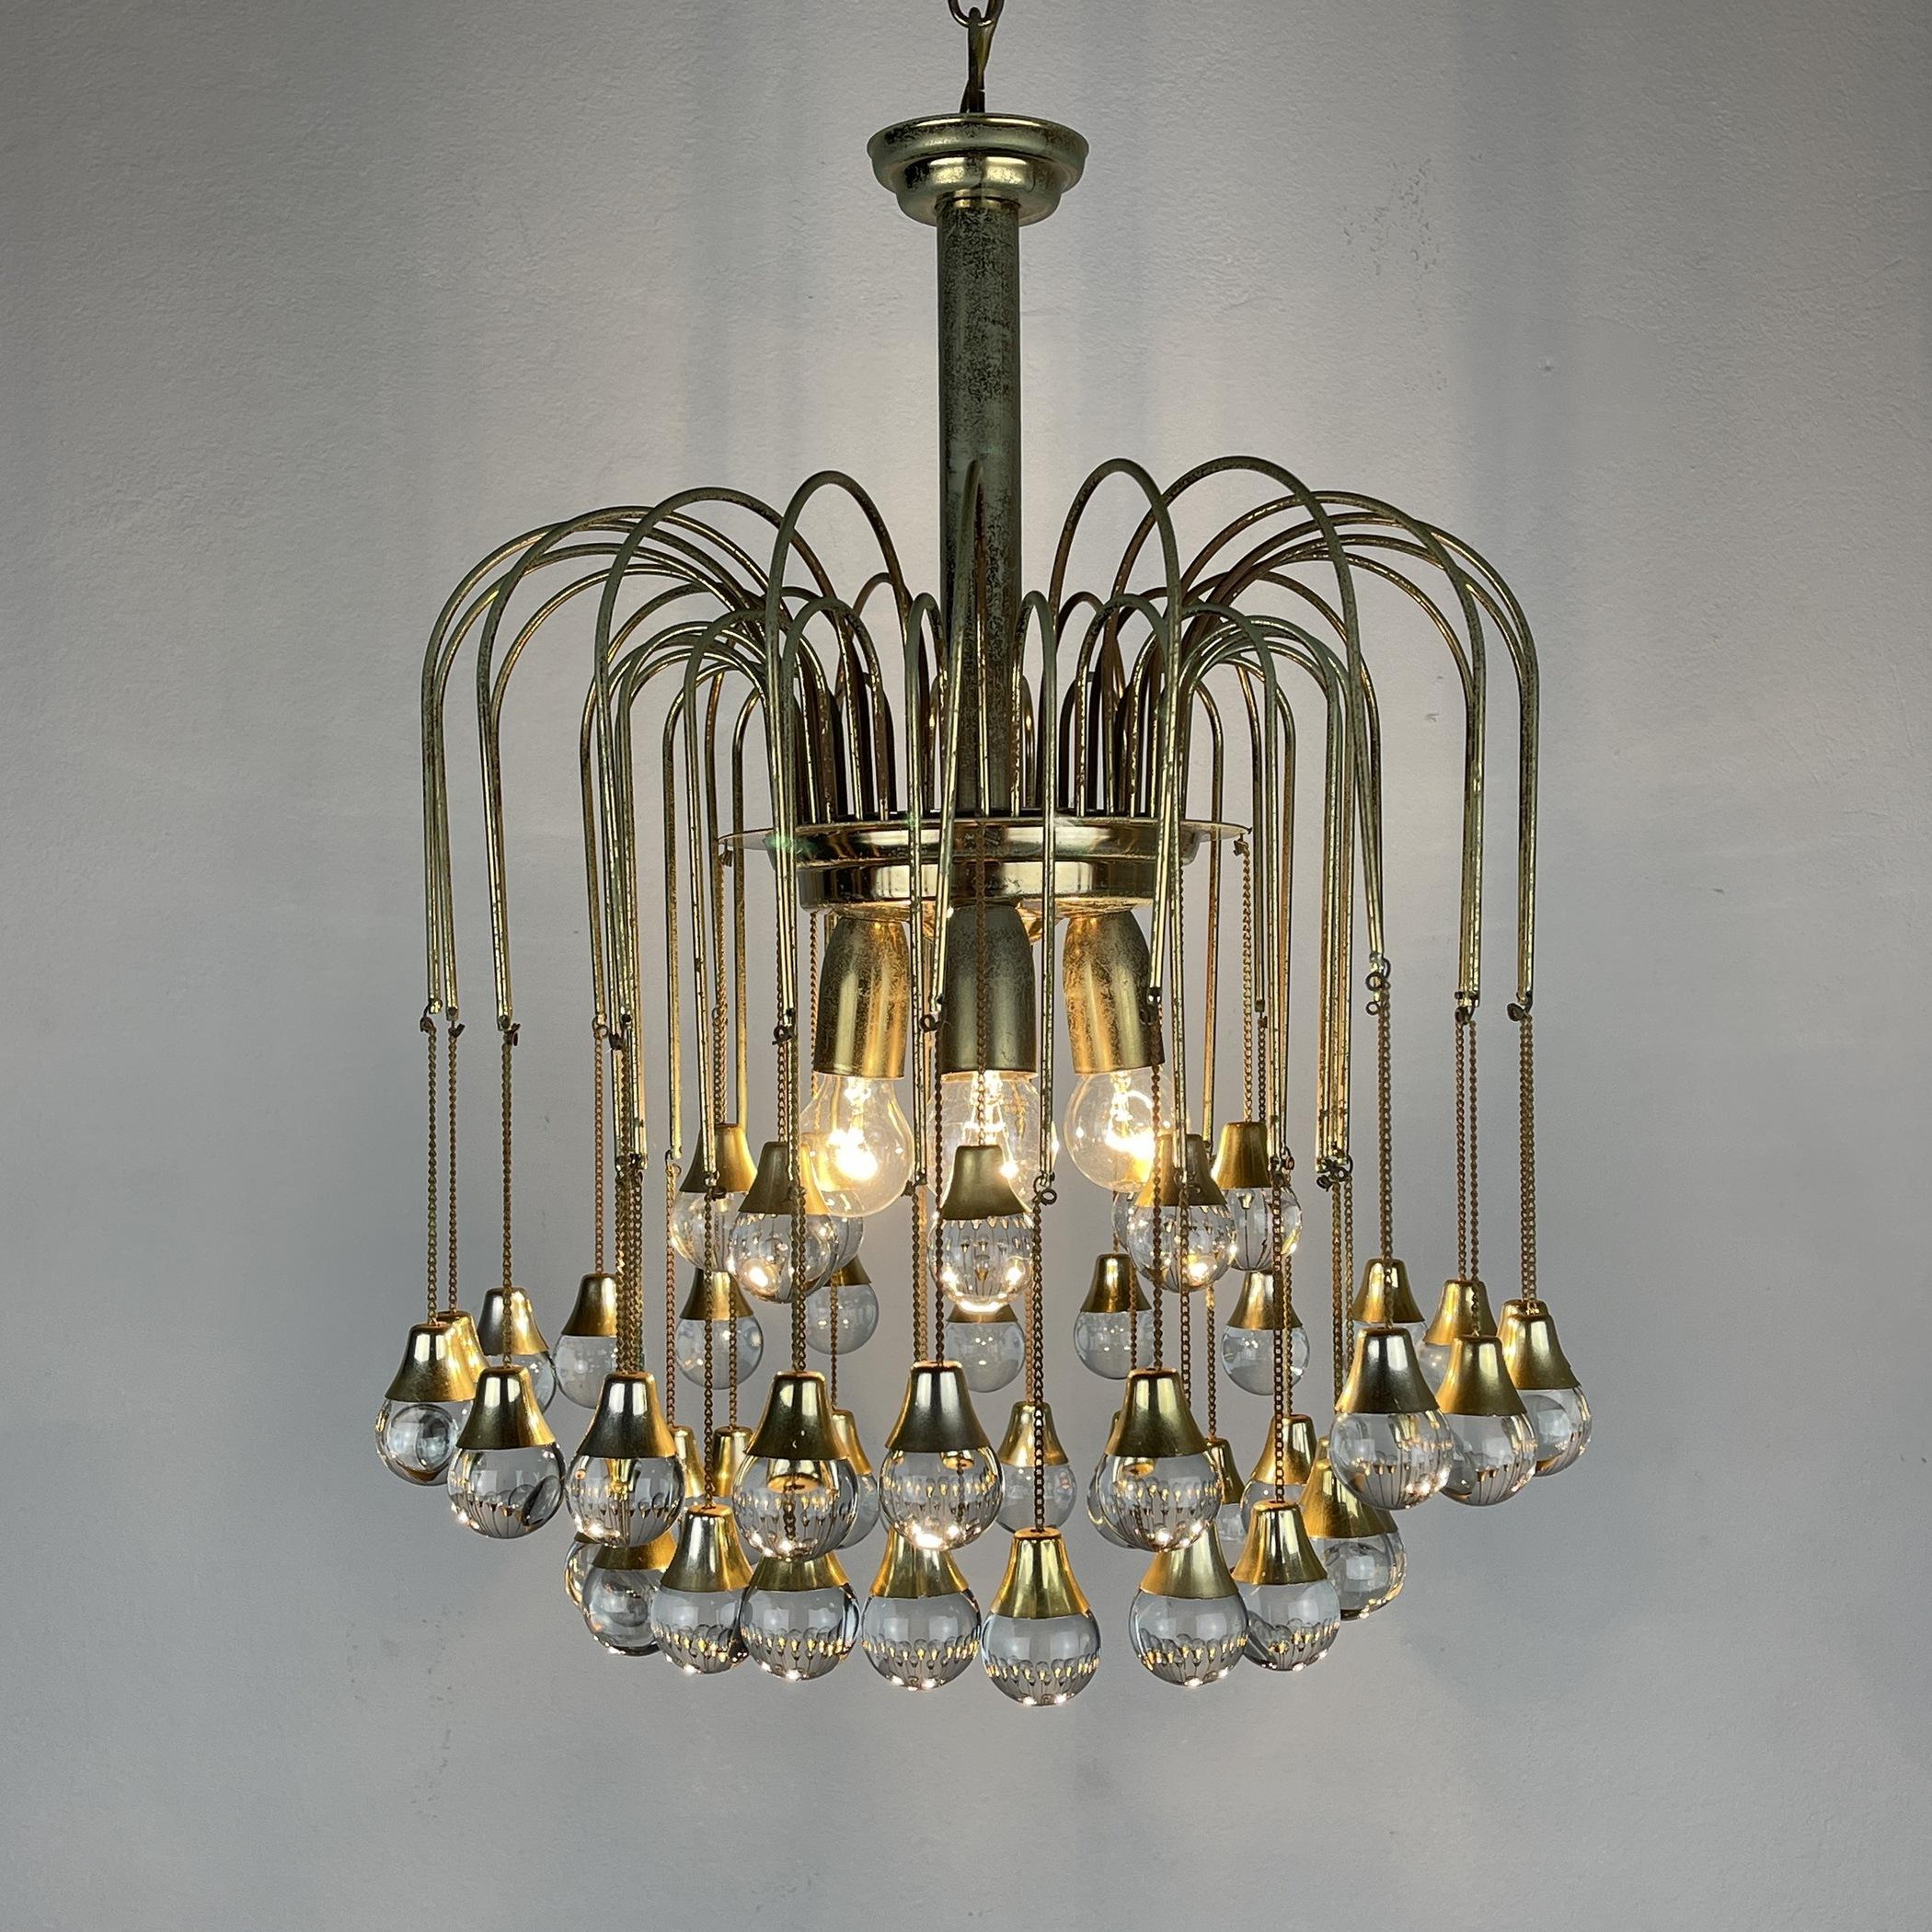 Vintage Cascade Glass Chandelier Italy 1960s Brass and 48 Glass Balls 11